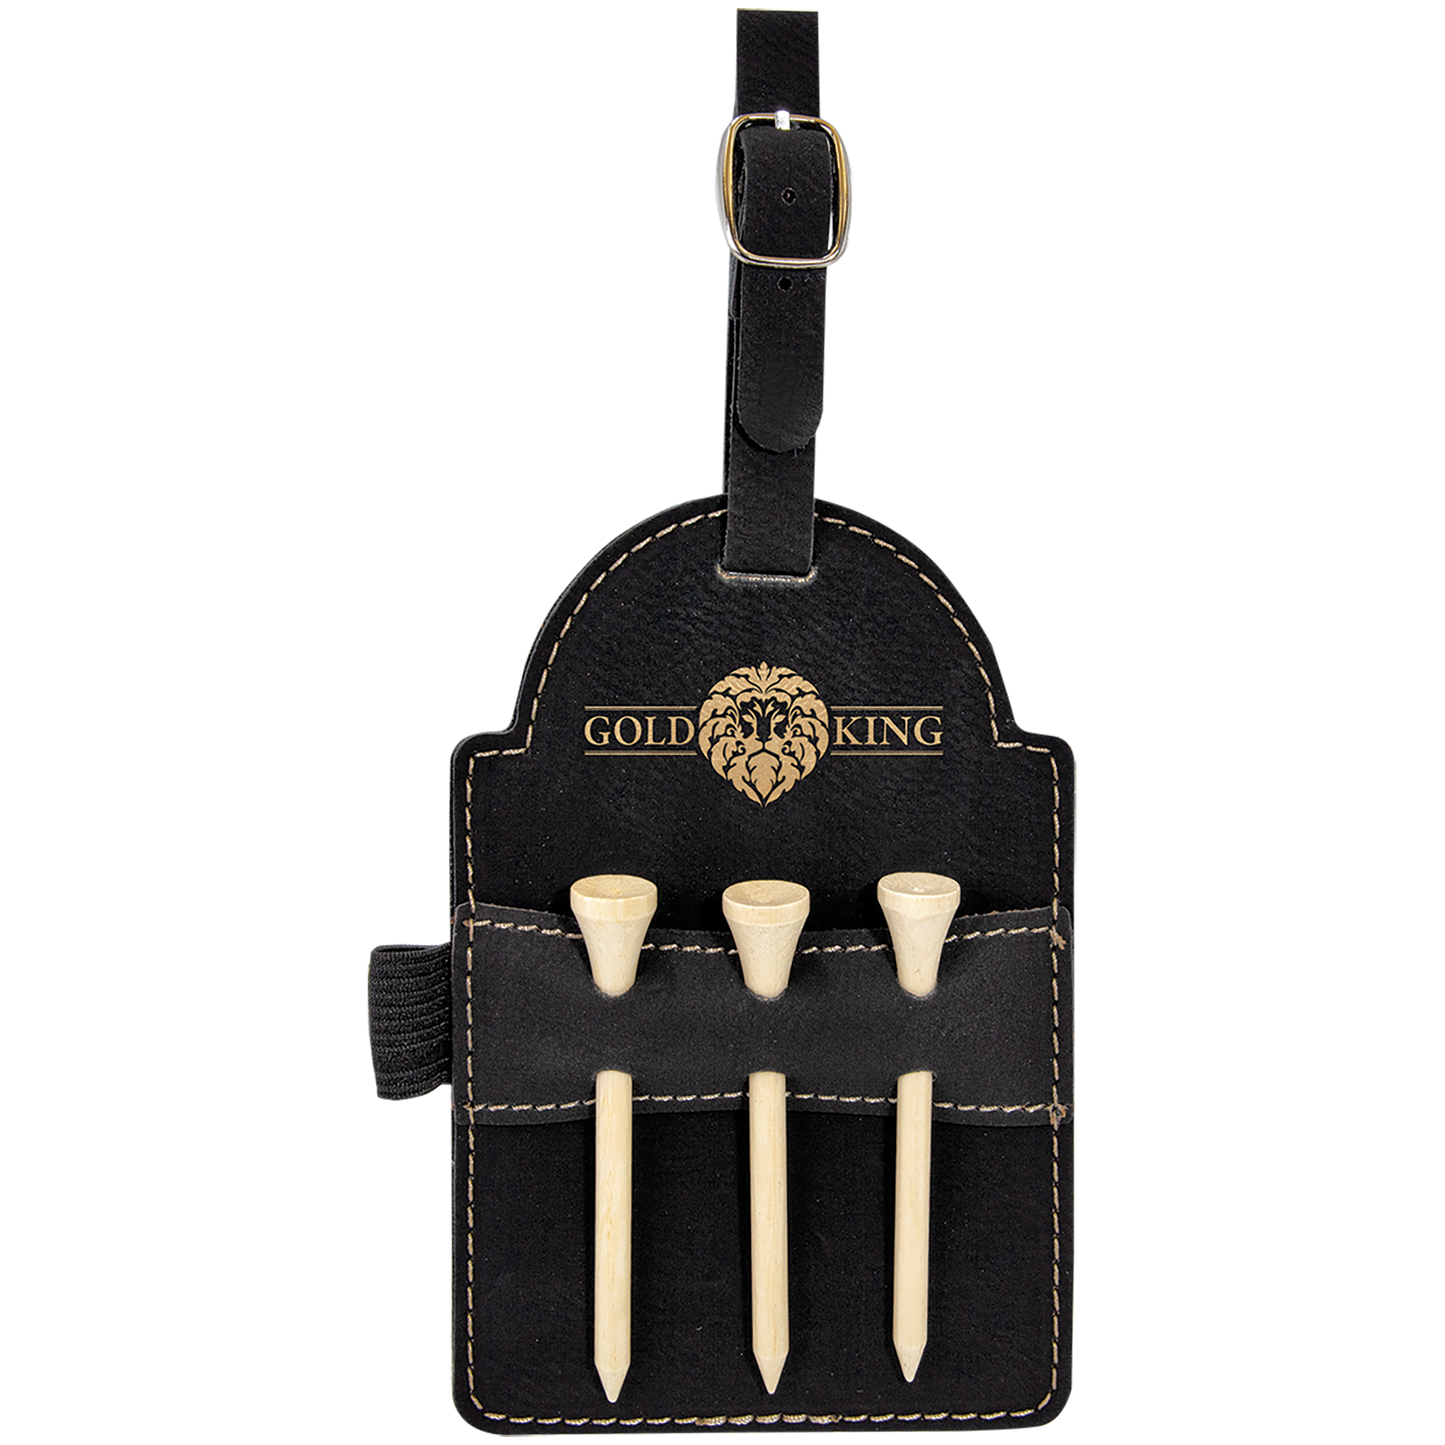 5" x 3 1/4" Black/Gold Leatherette Golf Bag Tag with 3 Wooden Tees